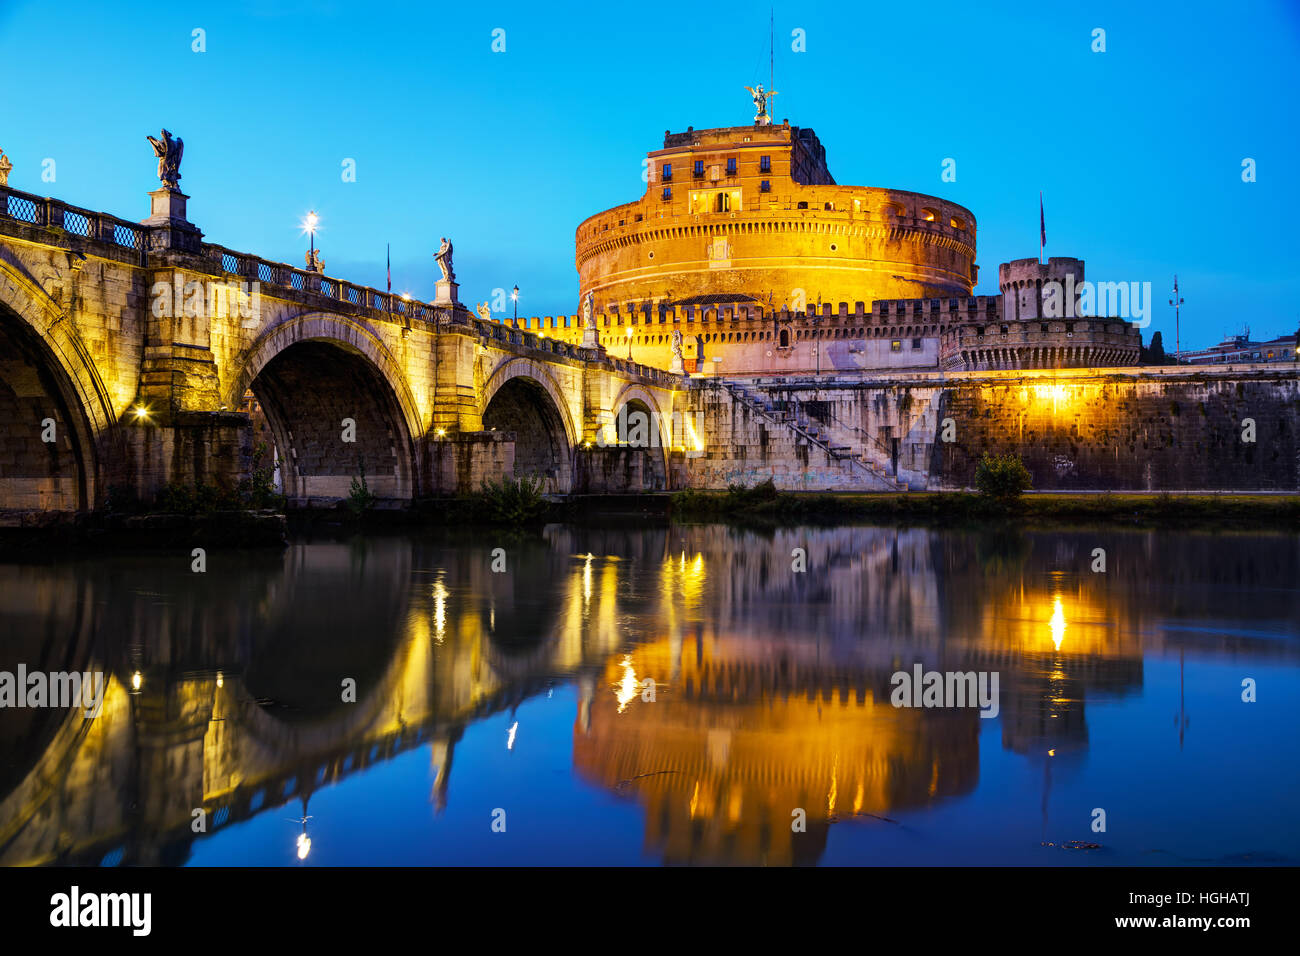 The Mausoleum of Hadrian (Castel Sant'Angelo) in Rome at night Stock Photo